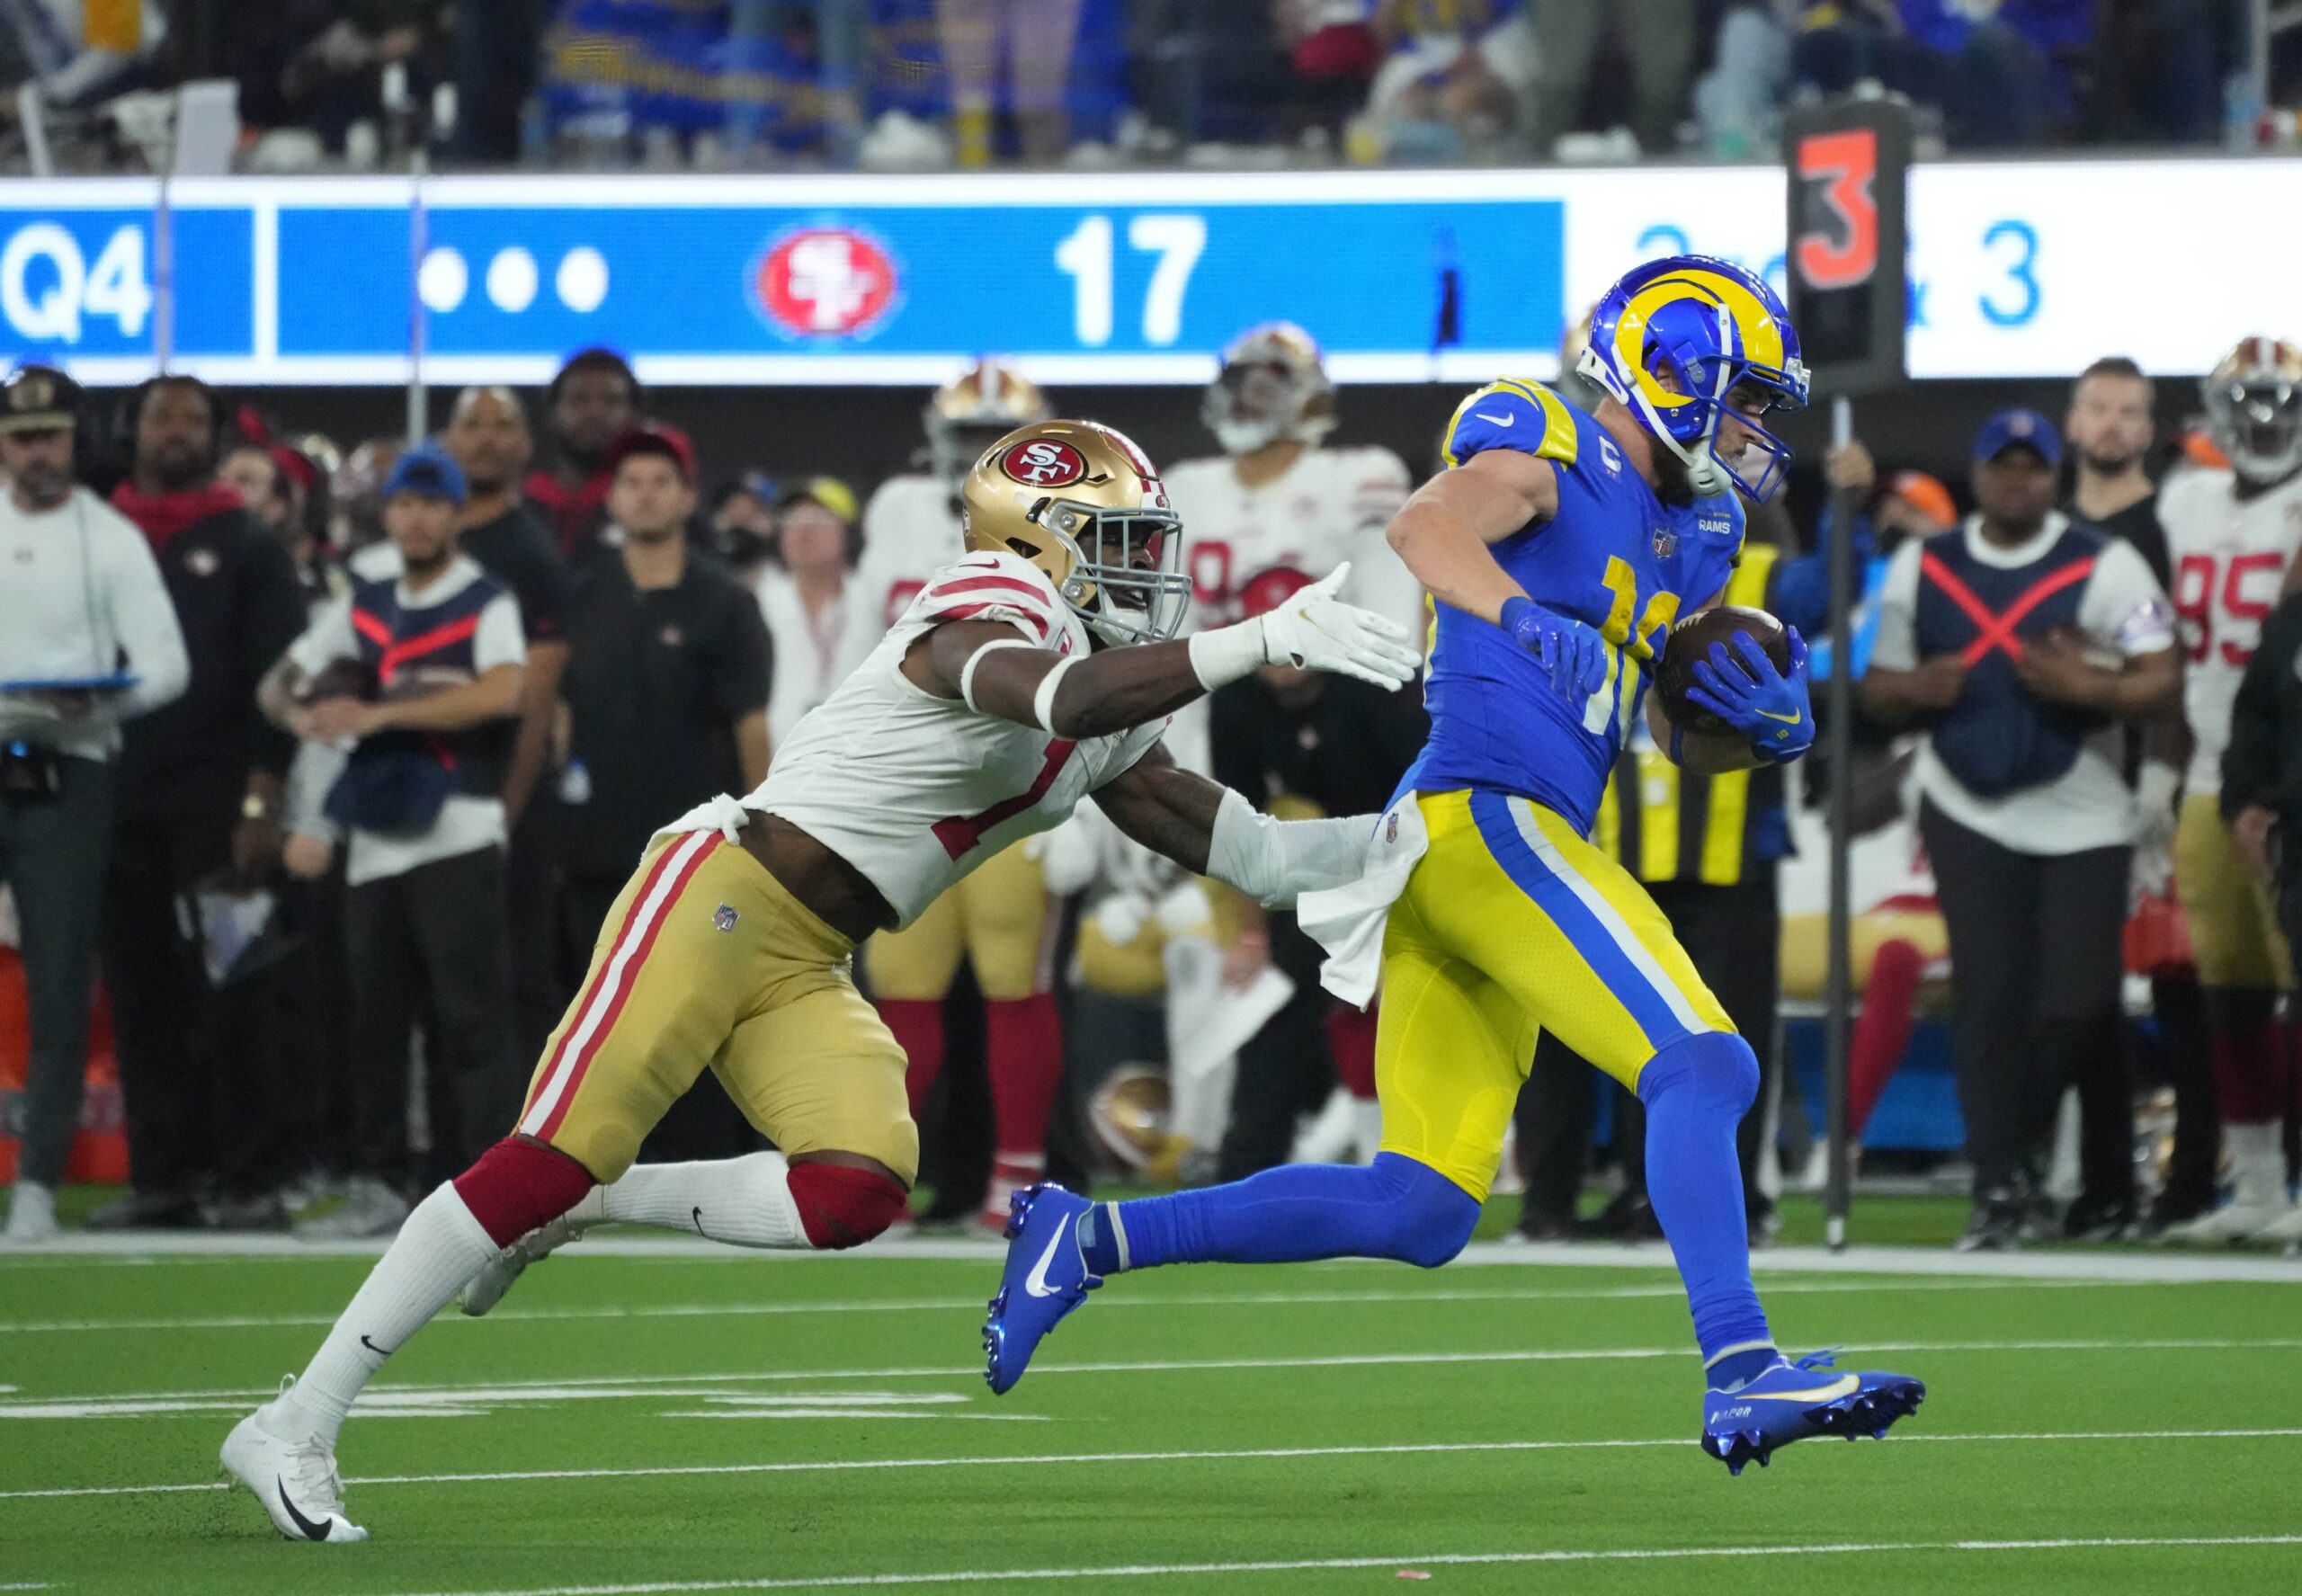 San Francisco 49ers vs. Los Angeles Rams Prediction and Preview